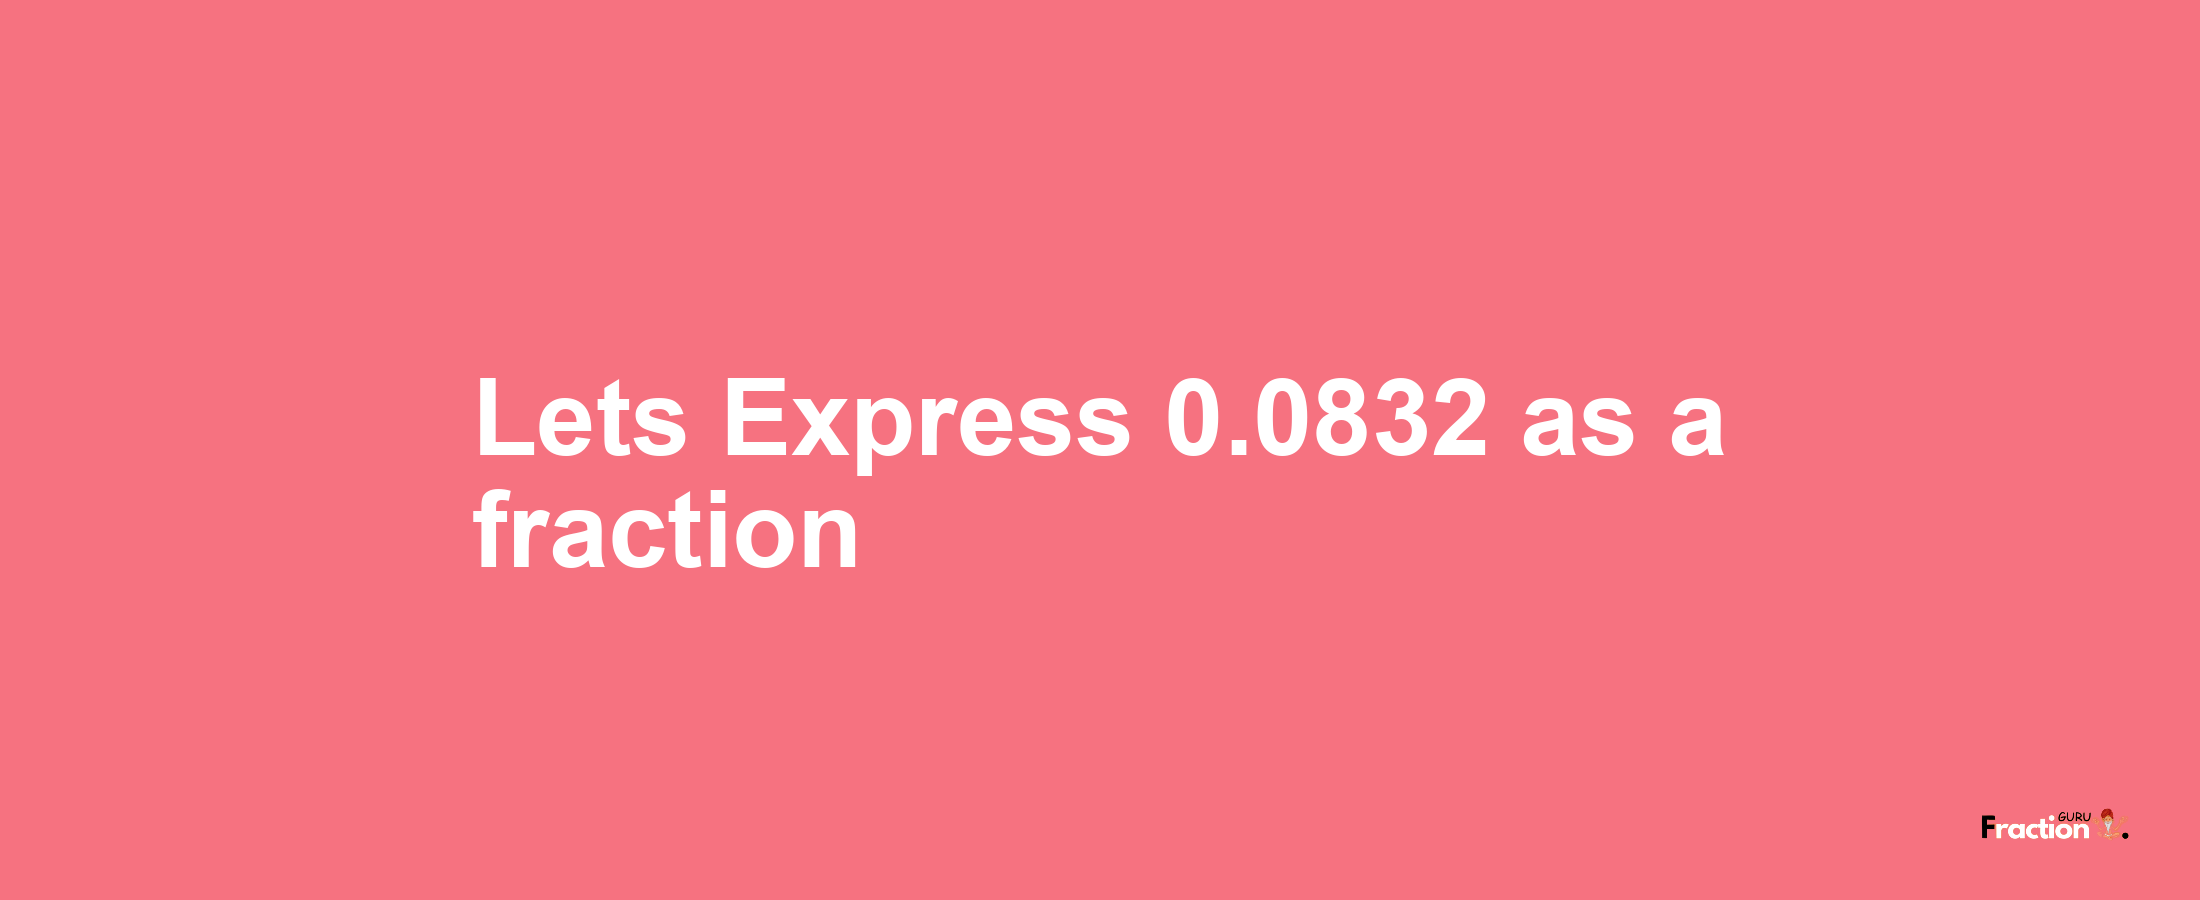 Lets Express 0.0832 as afraction